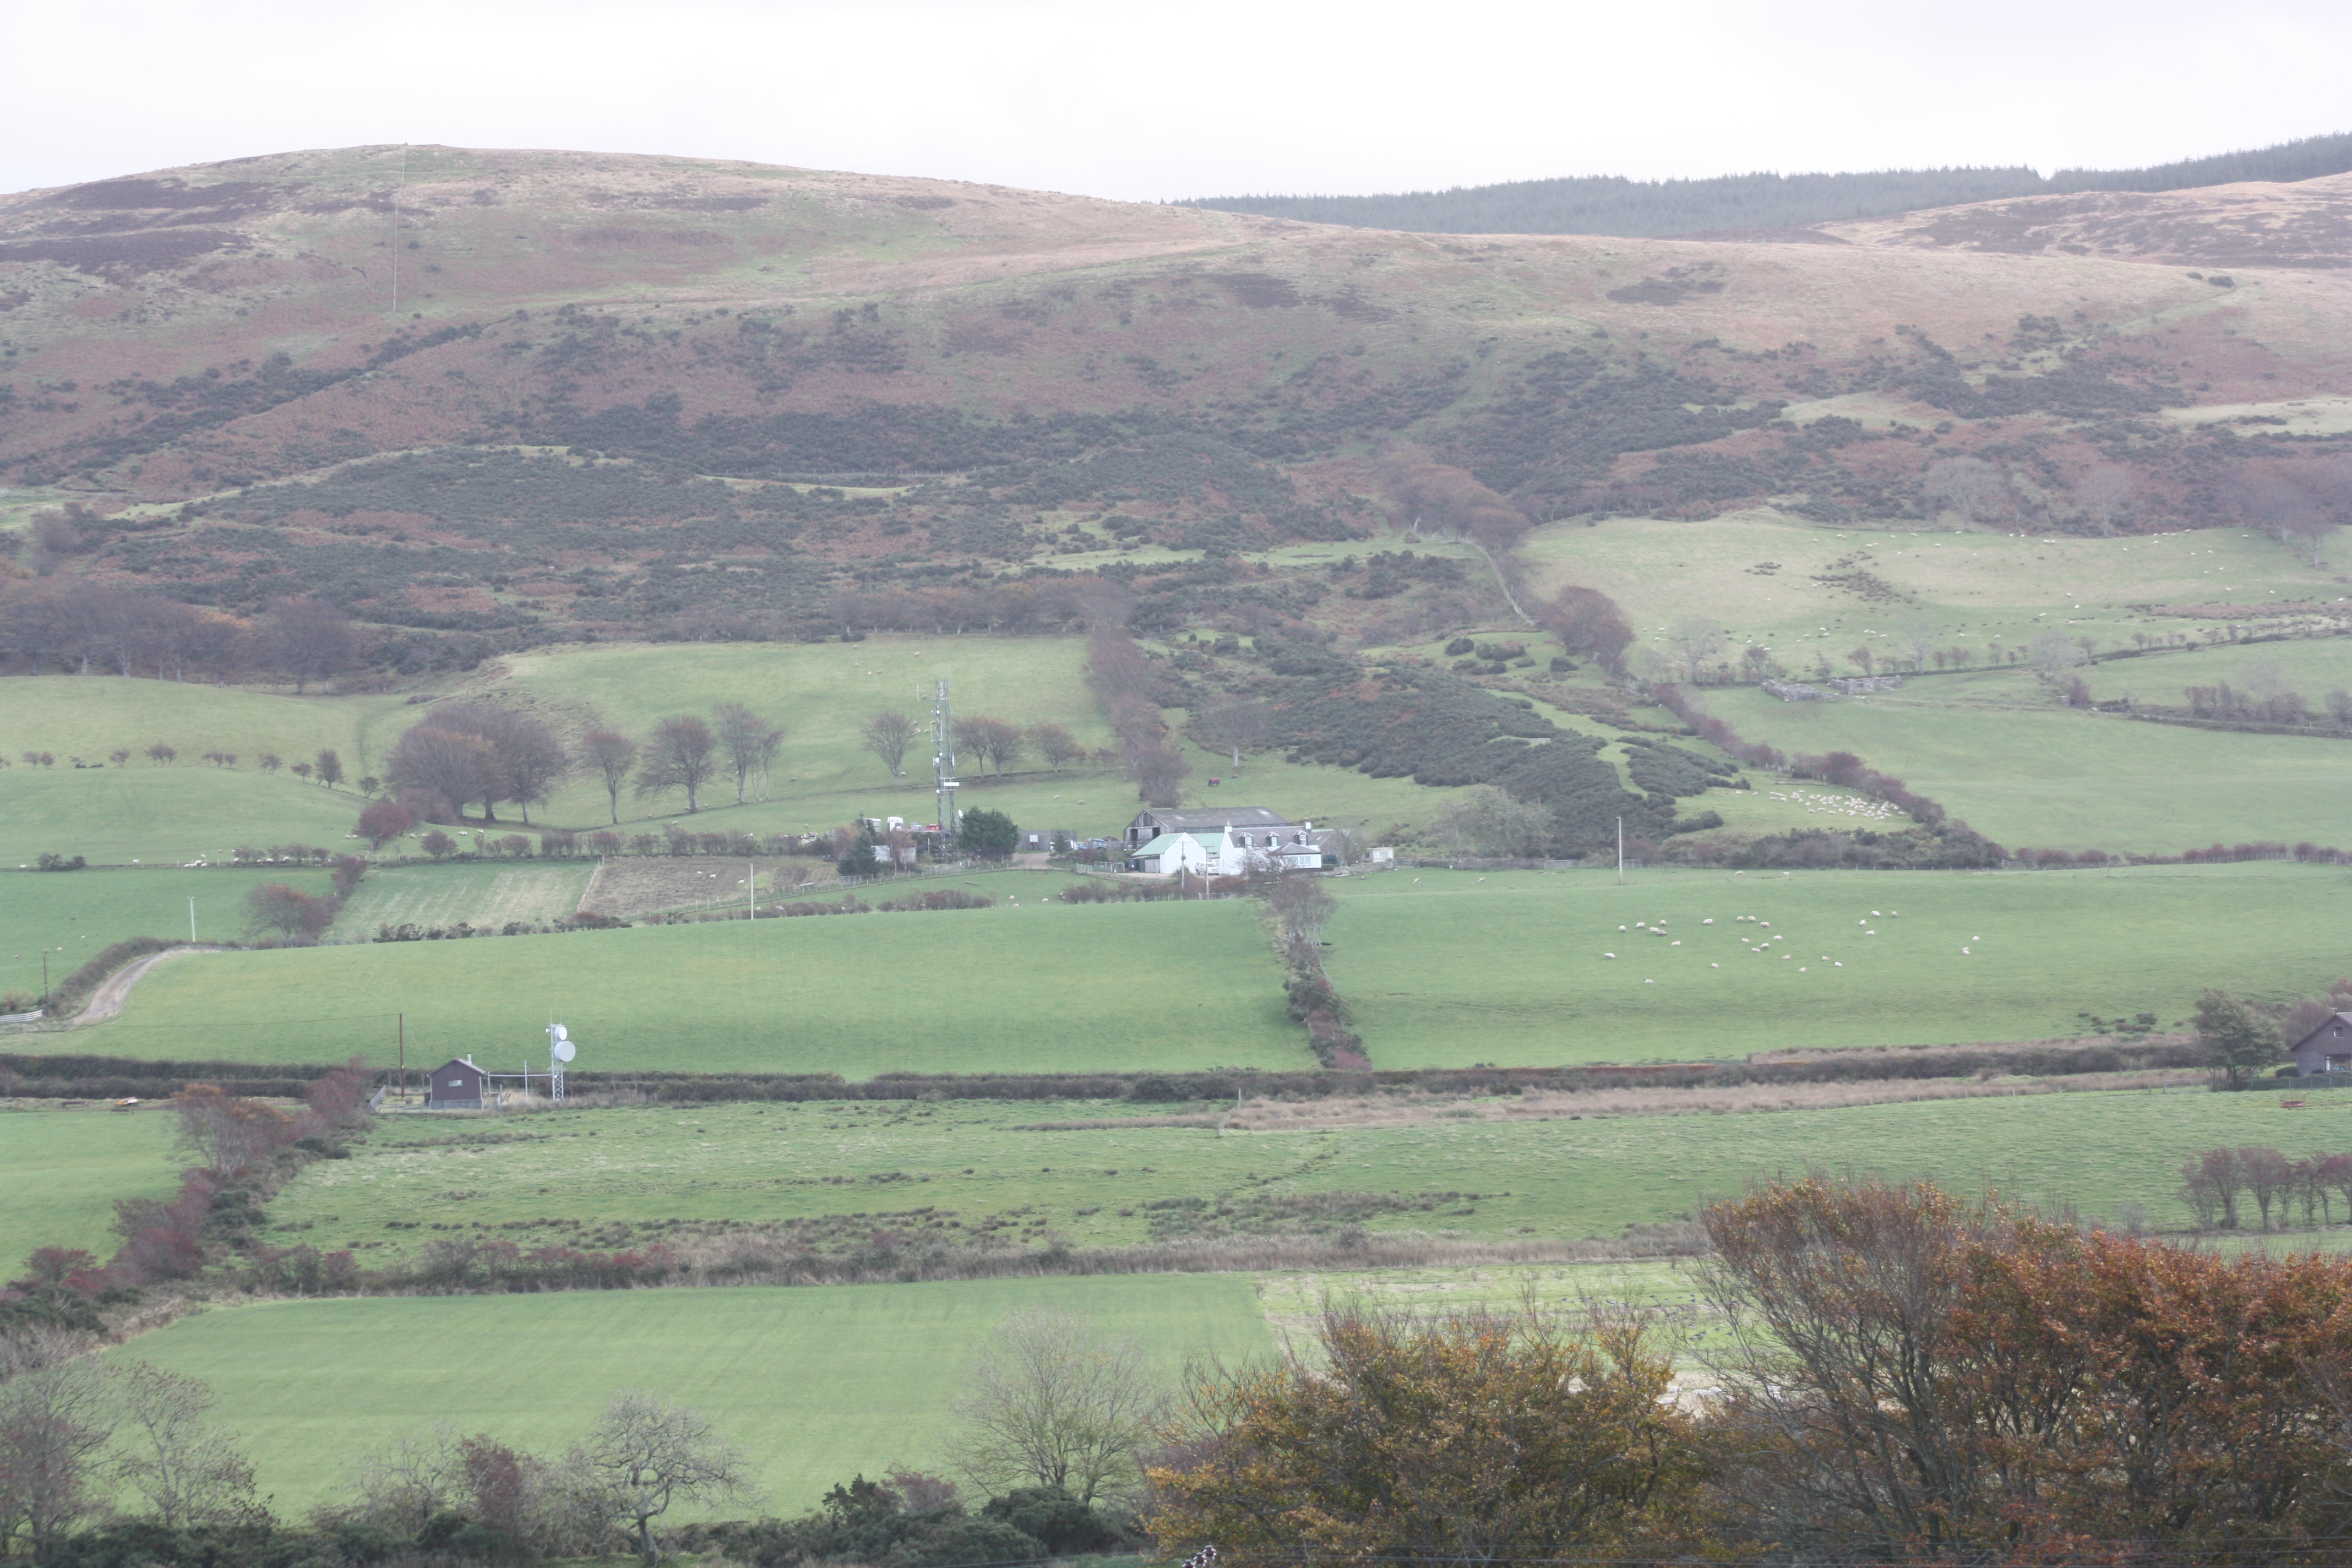 SMALL LANDHOLDING TENANTS URGED TO RESPOND TO GOVERNMENT SURVEY